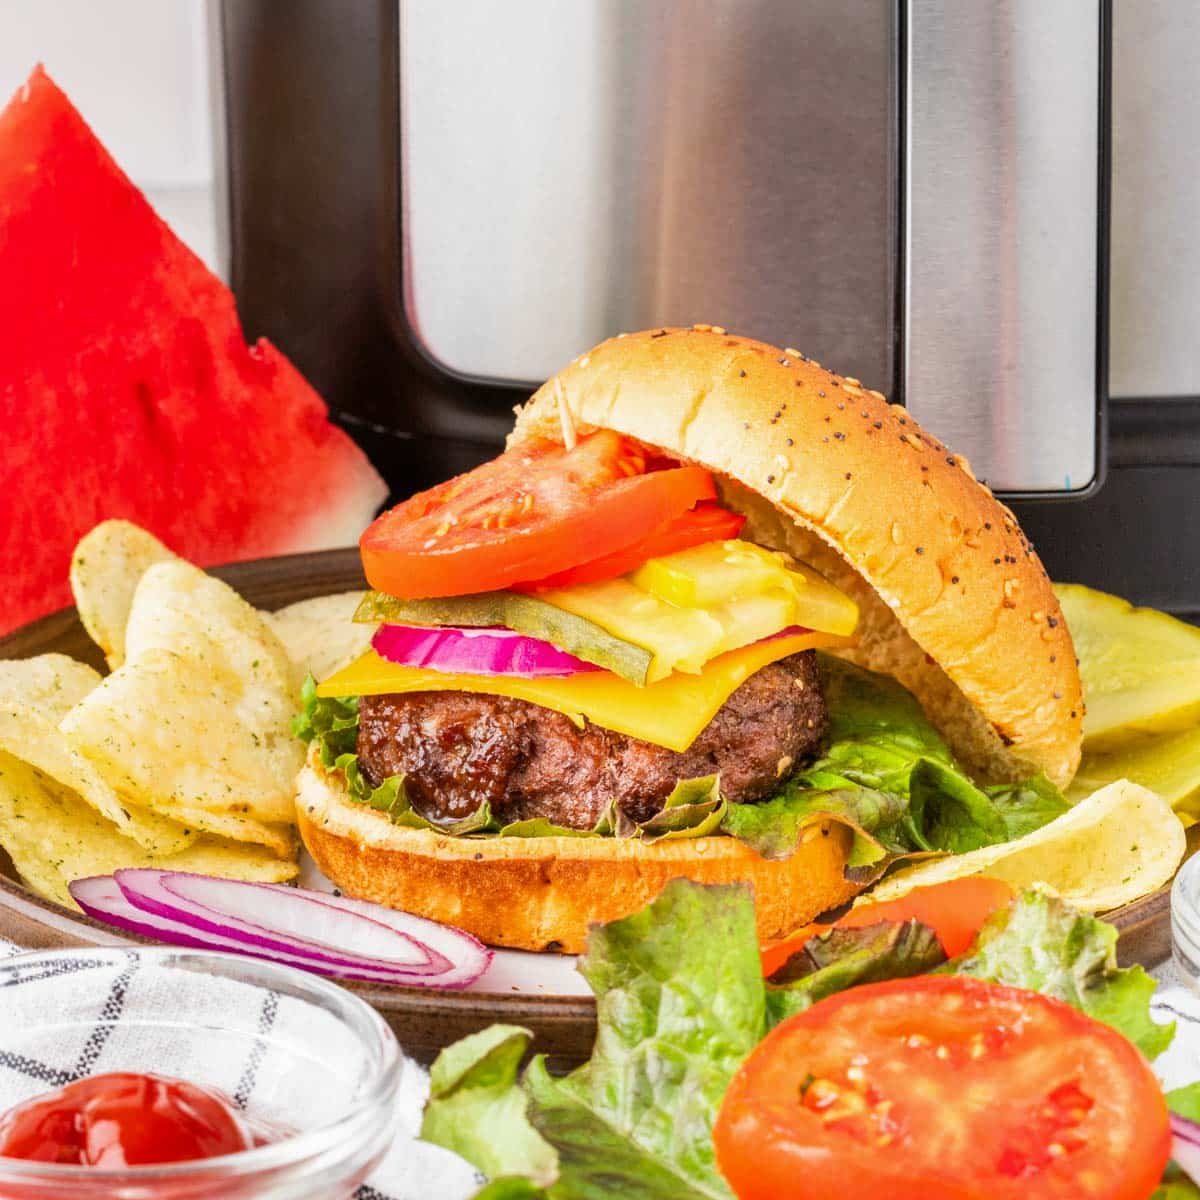 A hamburger on a bun with condiments on a plate along with chip and an air fryer in the background.